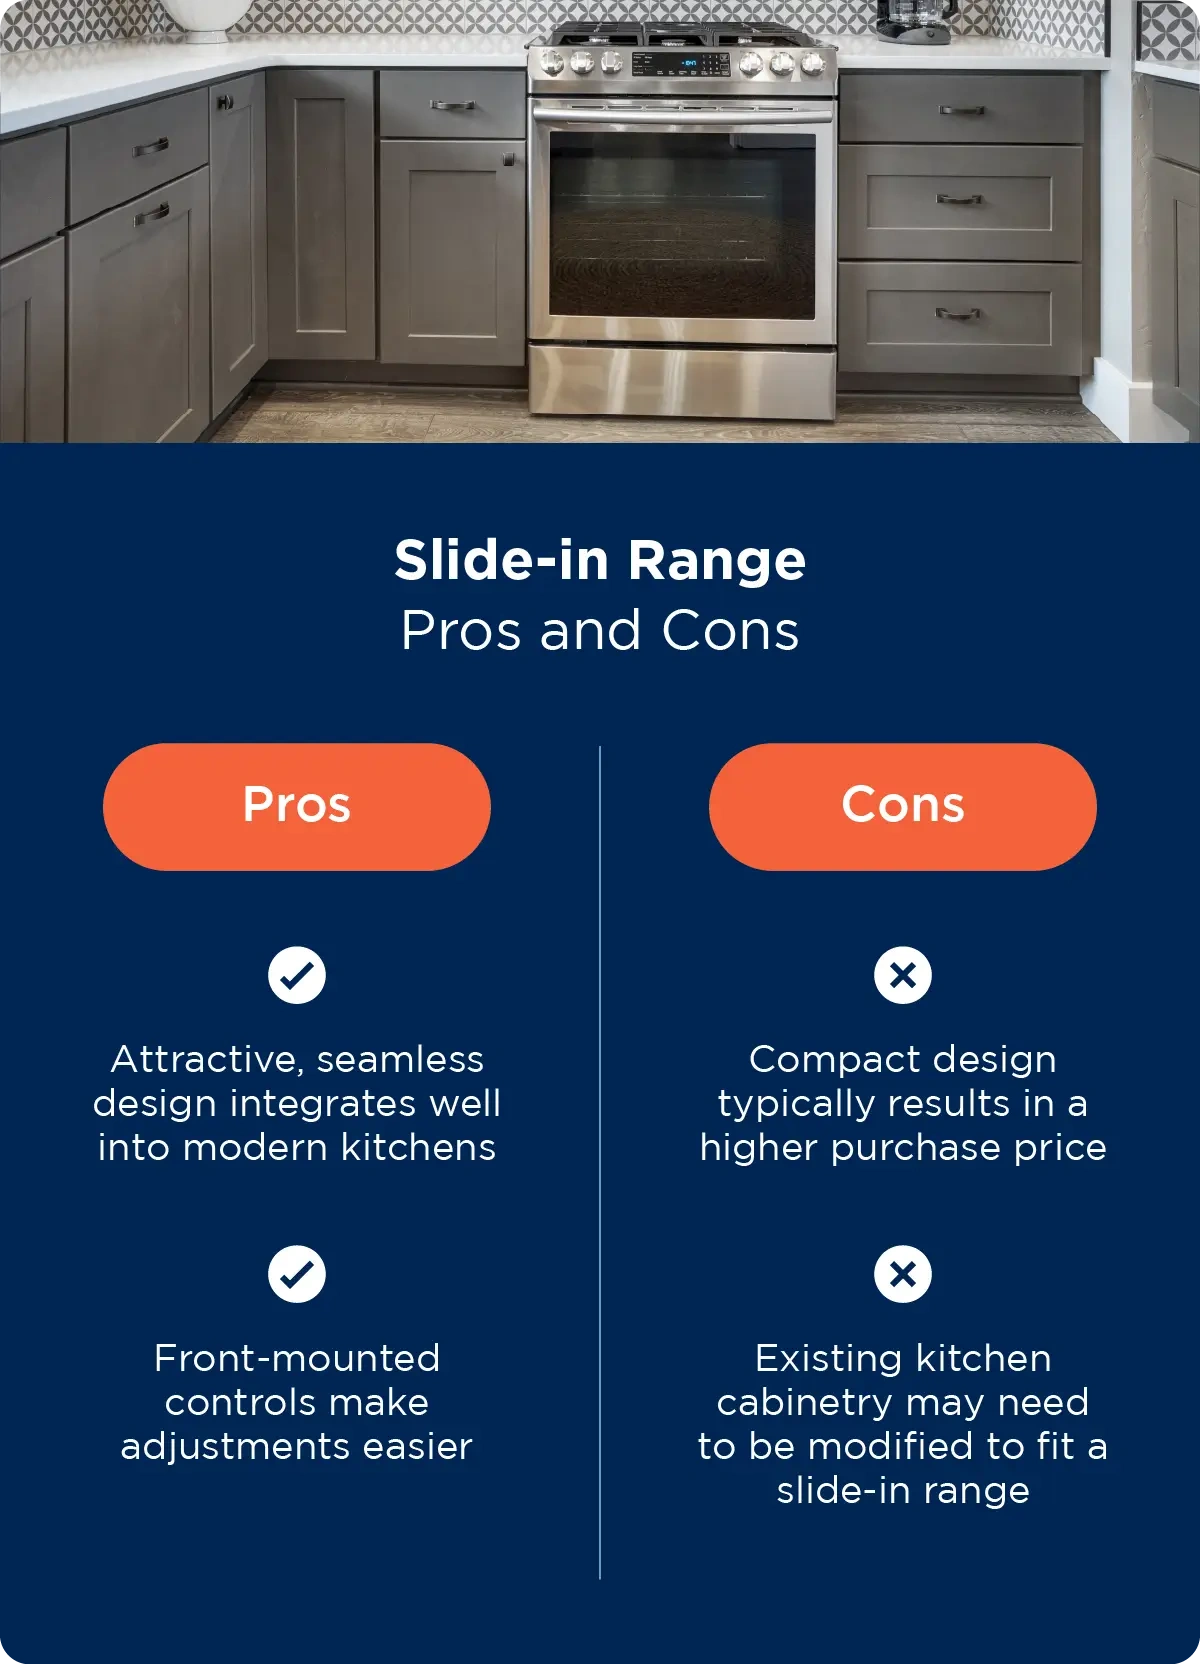 Pros and cons of a slide-in range | slide-in-range-pros-cons.